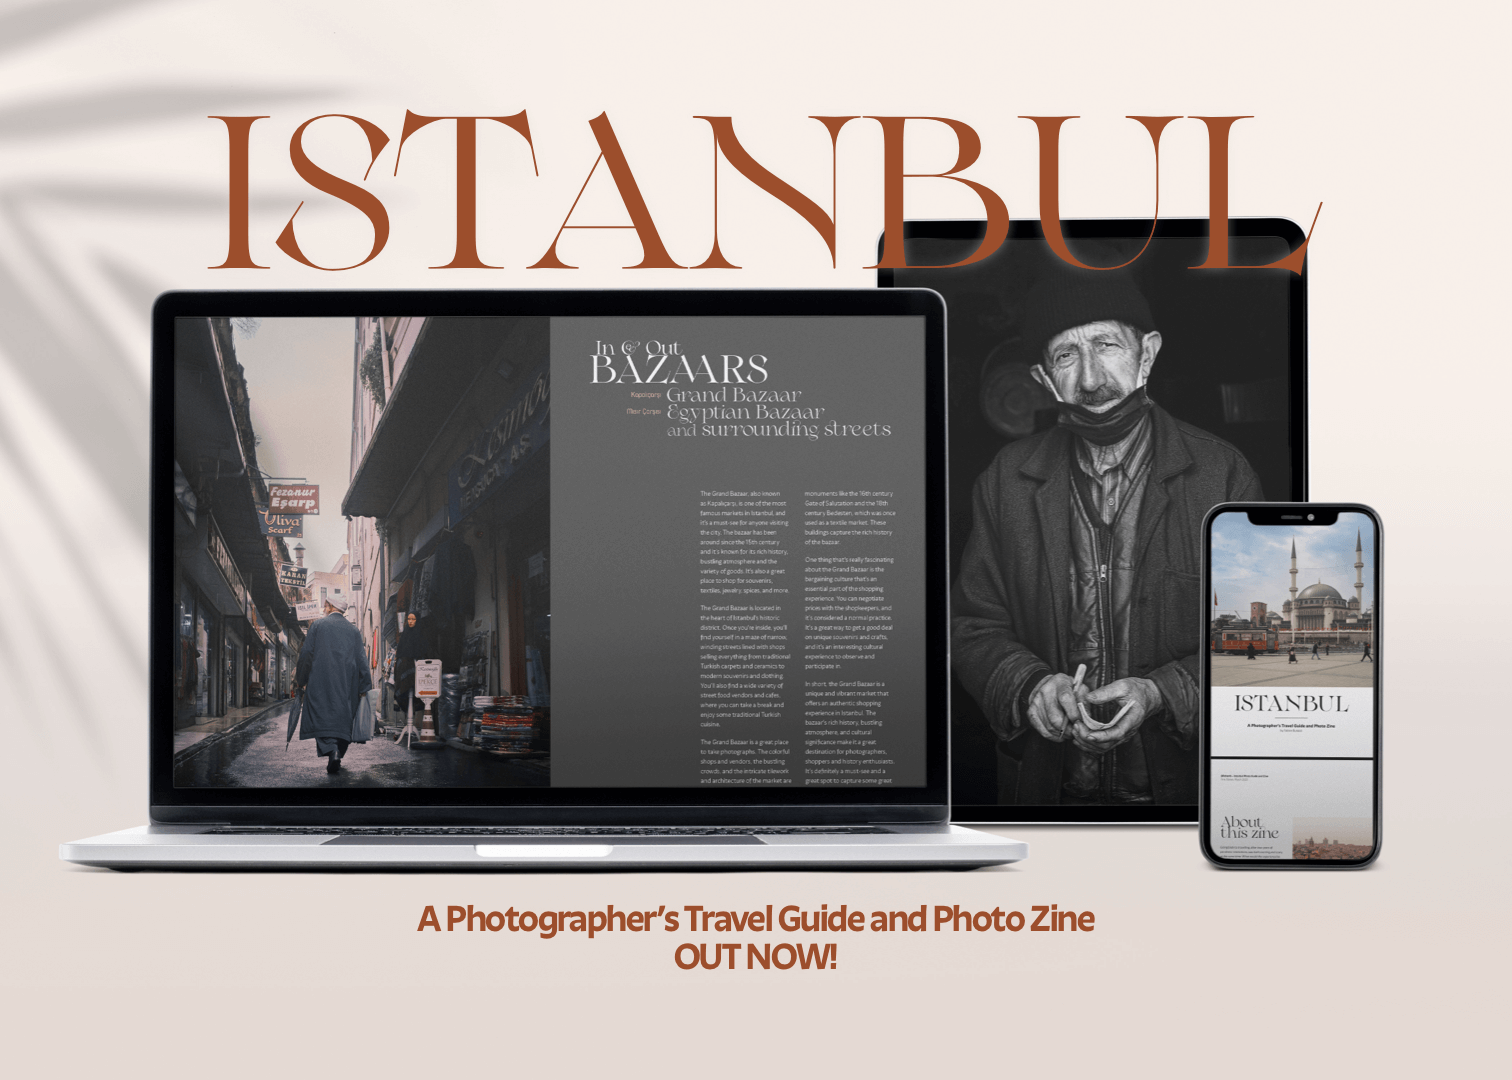 Istanbul Travel Guide and Photo Zine preview on devices